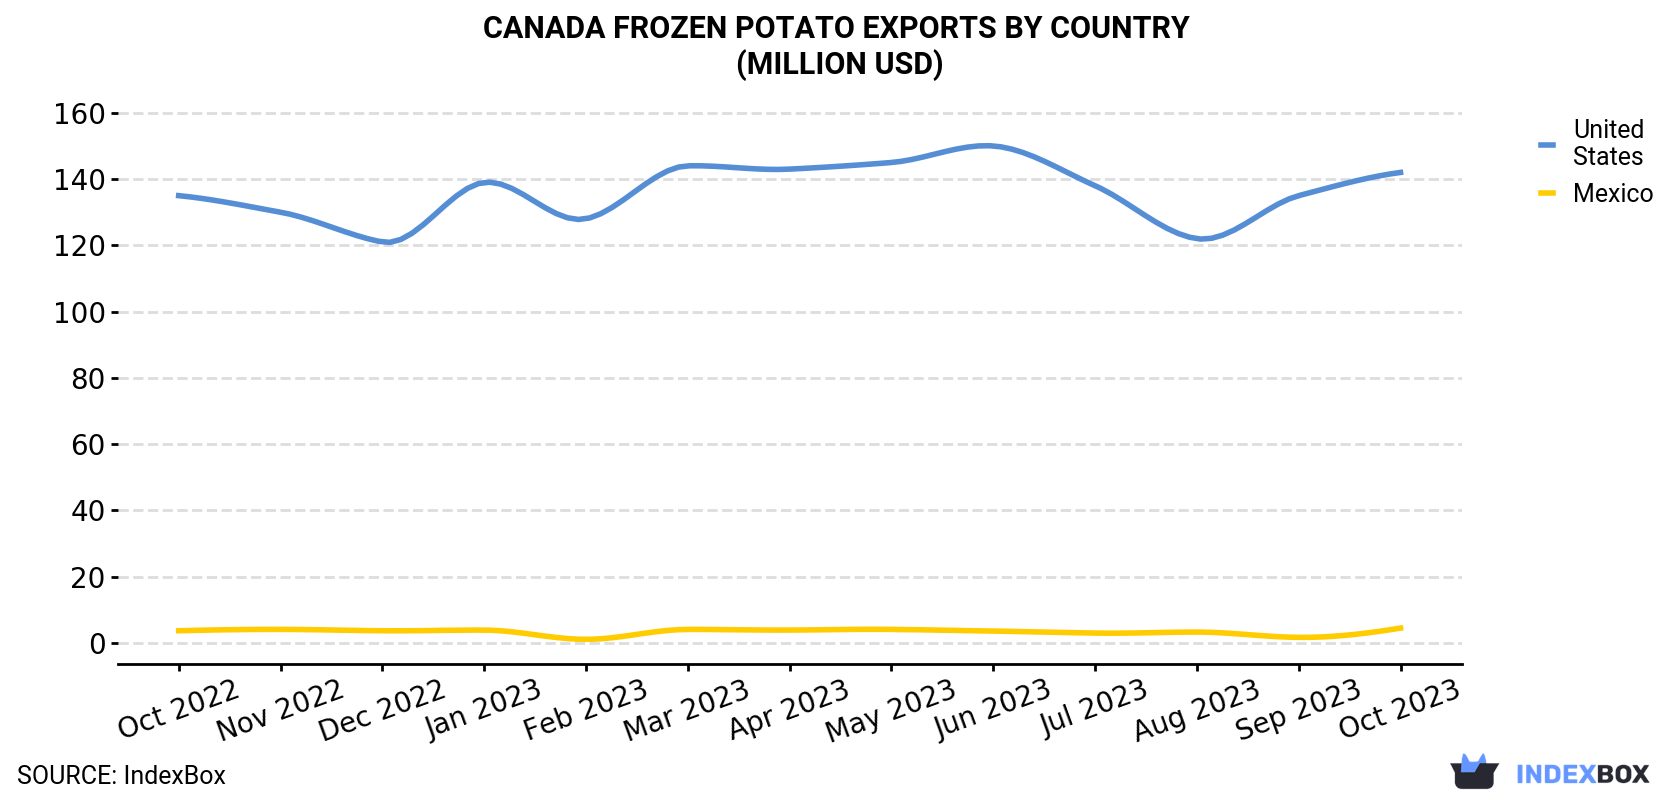 Canada Frozen Potato Exports By Country (Million USD)